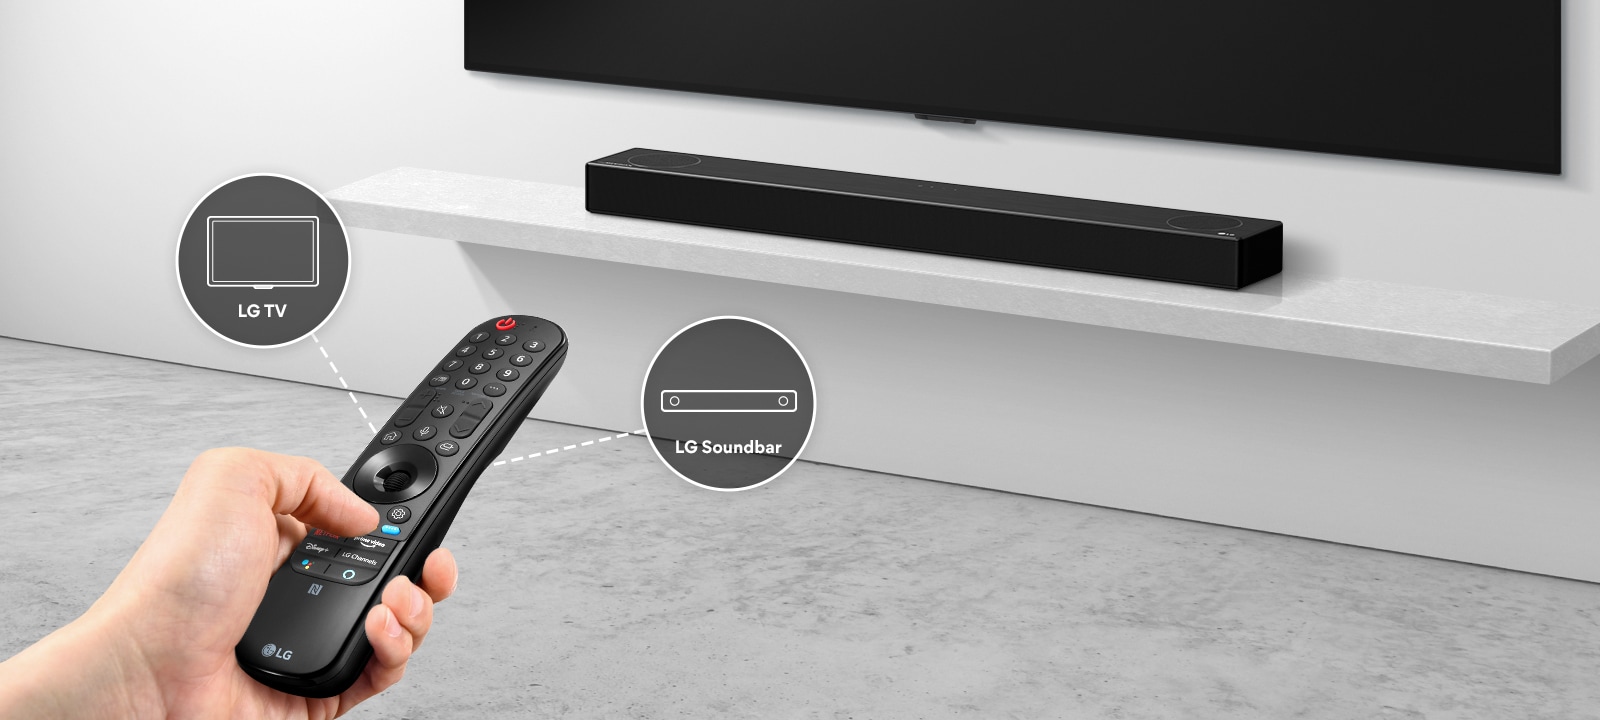 There is a remote control in someone's hand, controlling TV and soundbar in the back. There are icons of LG TV and LG Soundbar. 